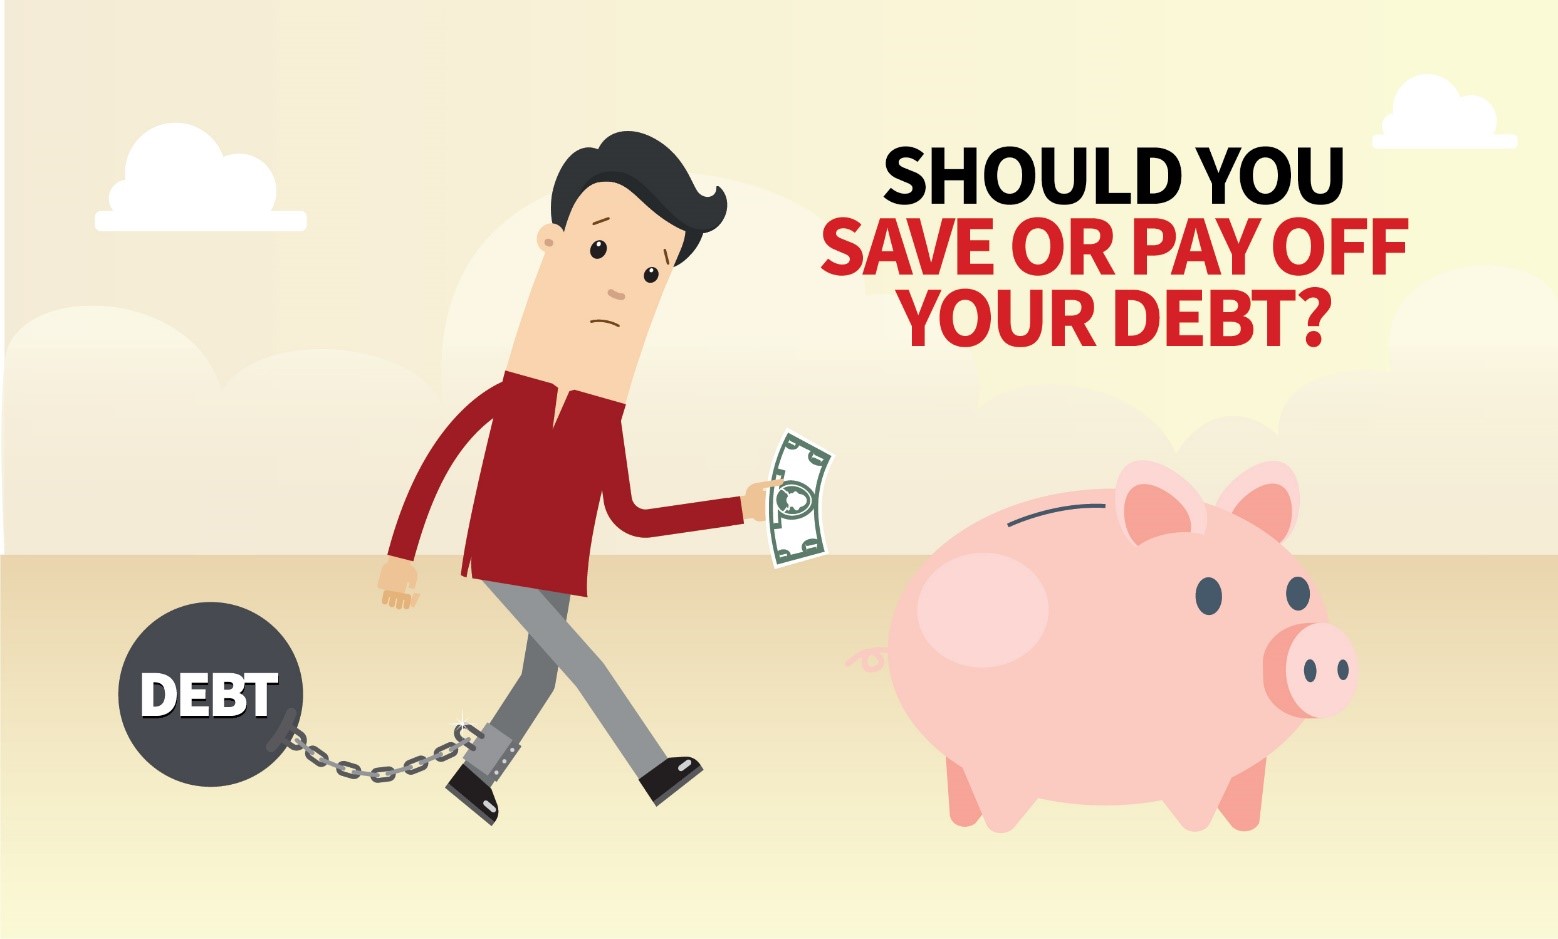 Should you save or pay off your debt